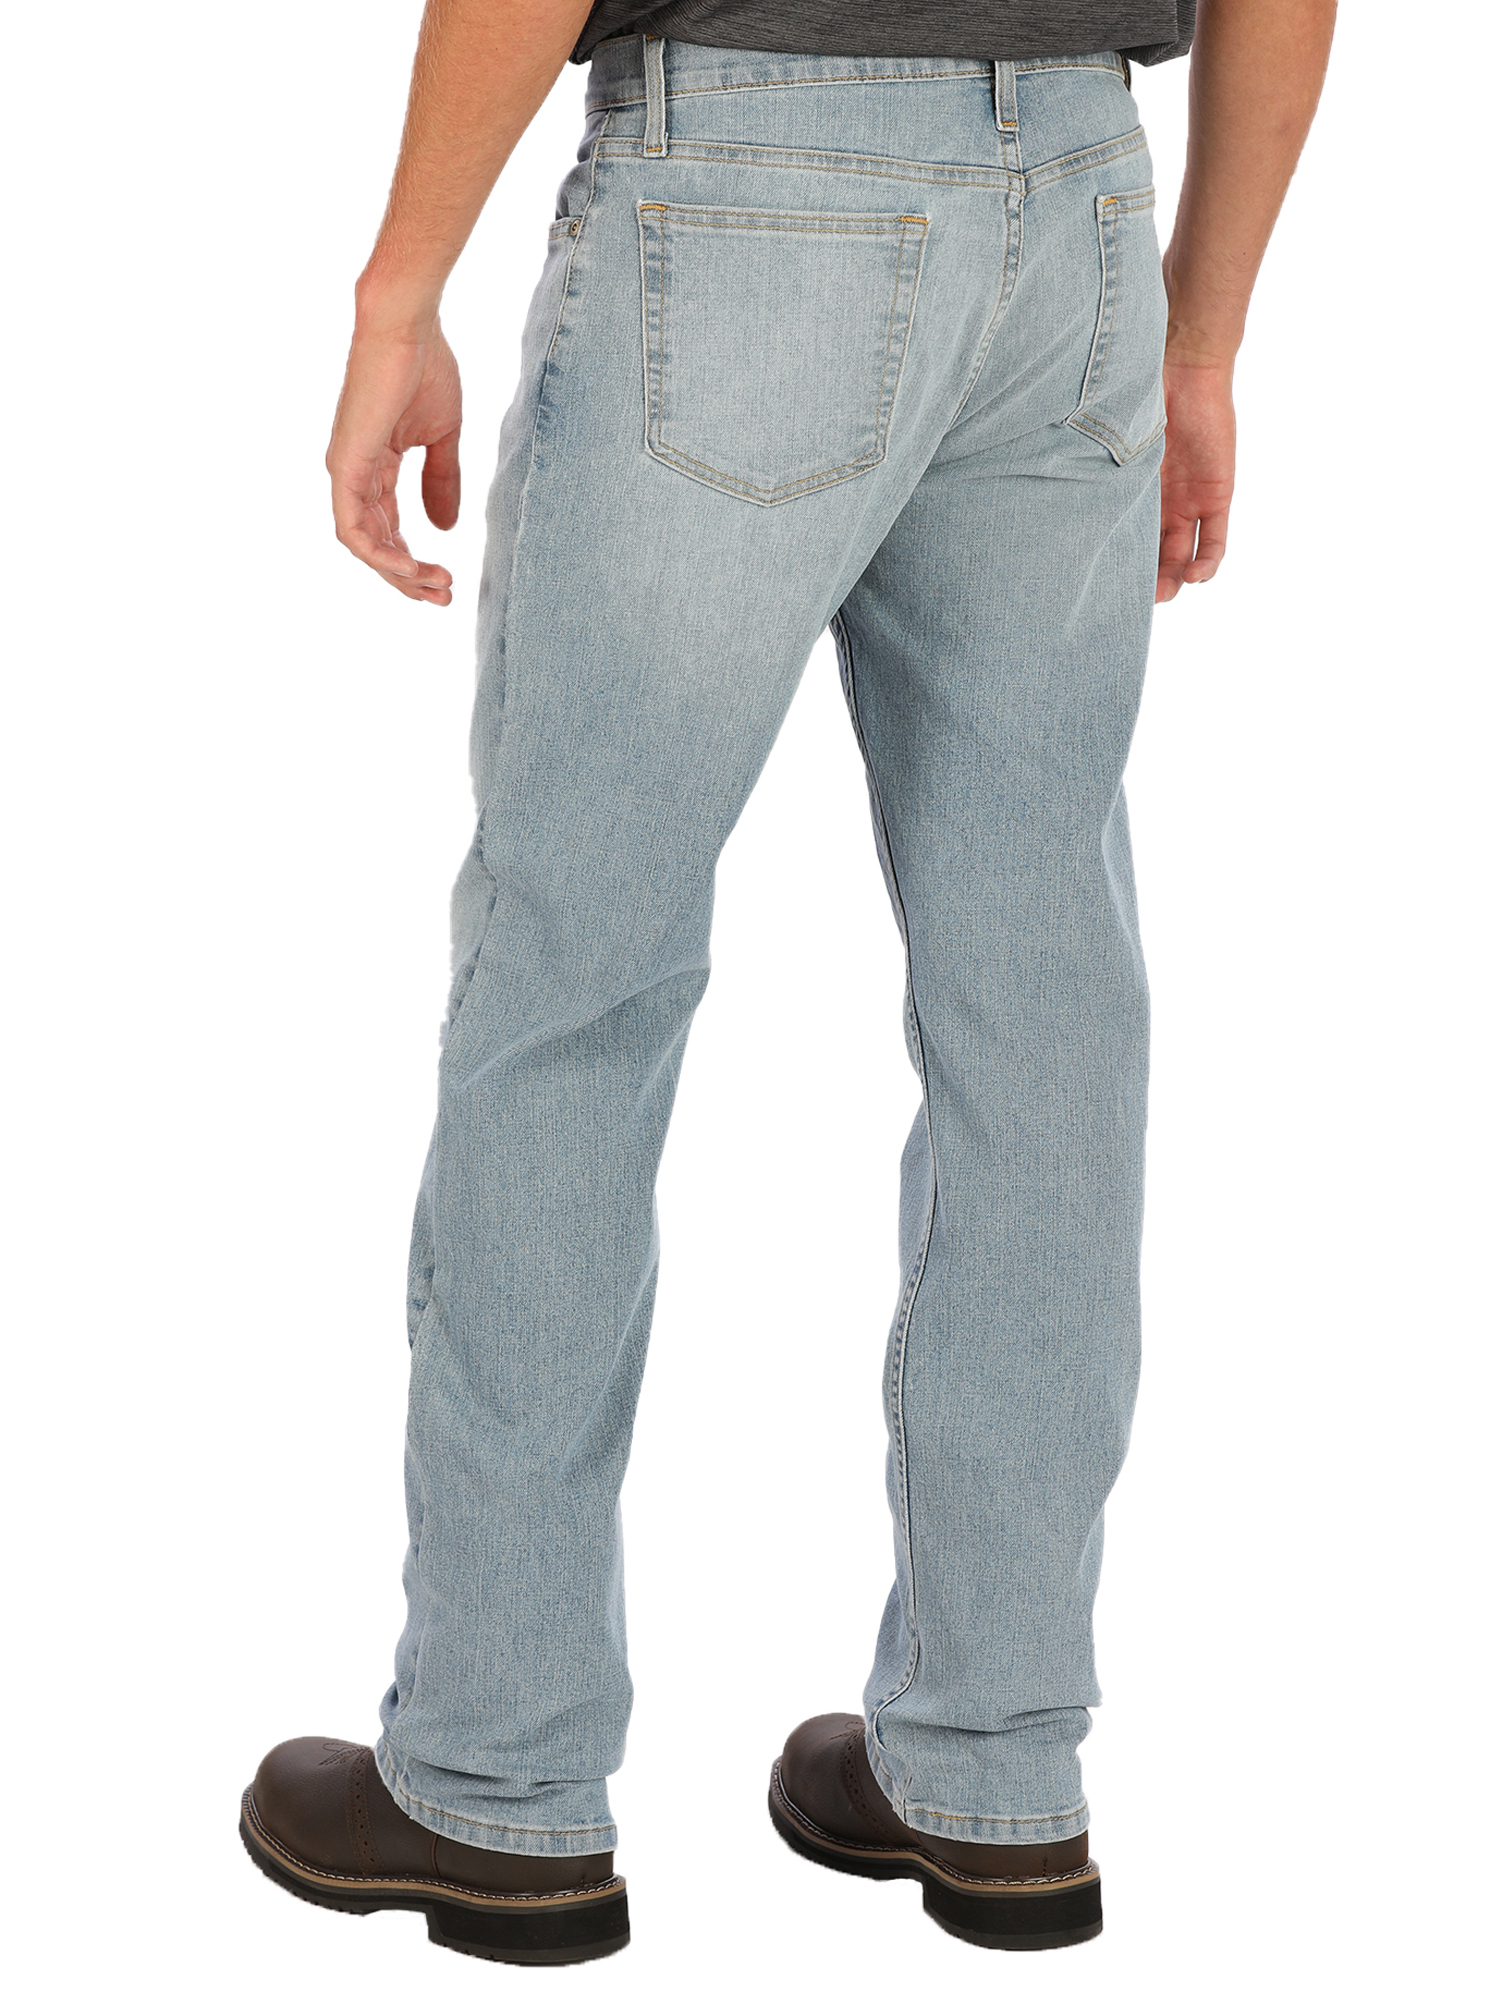 George Men's Bootcut Jeans - image 2 of 5